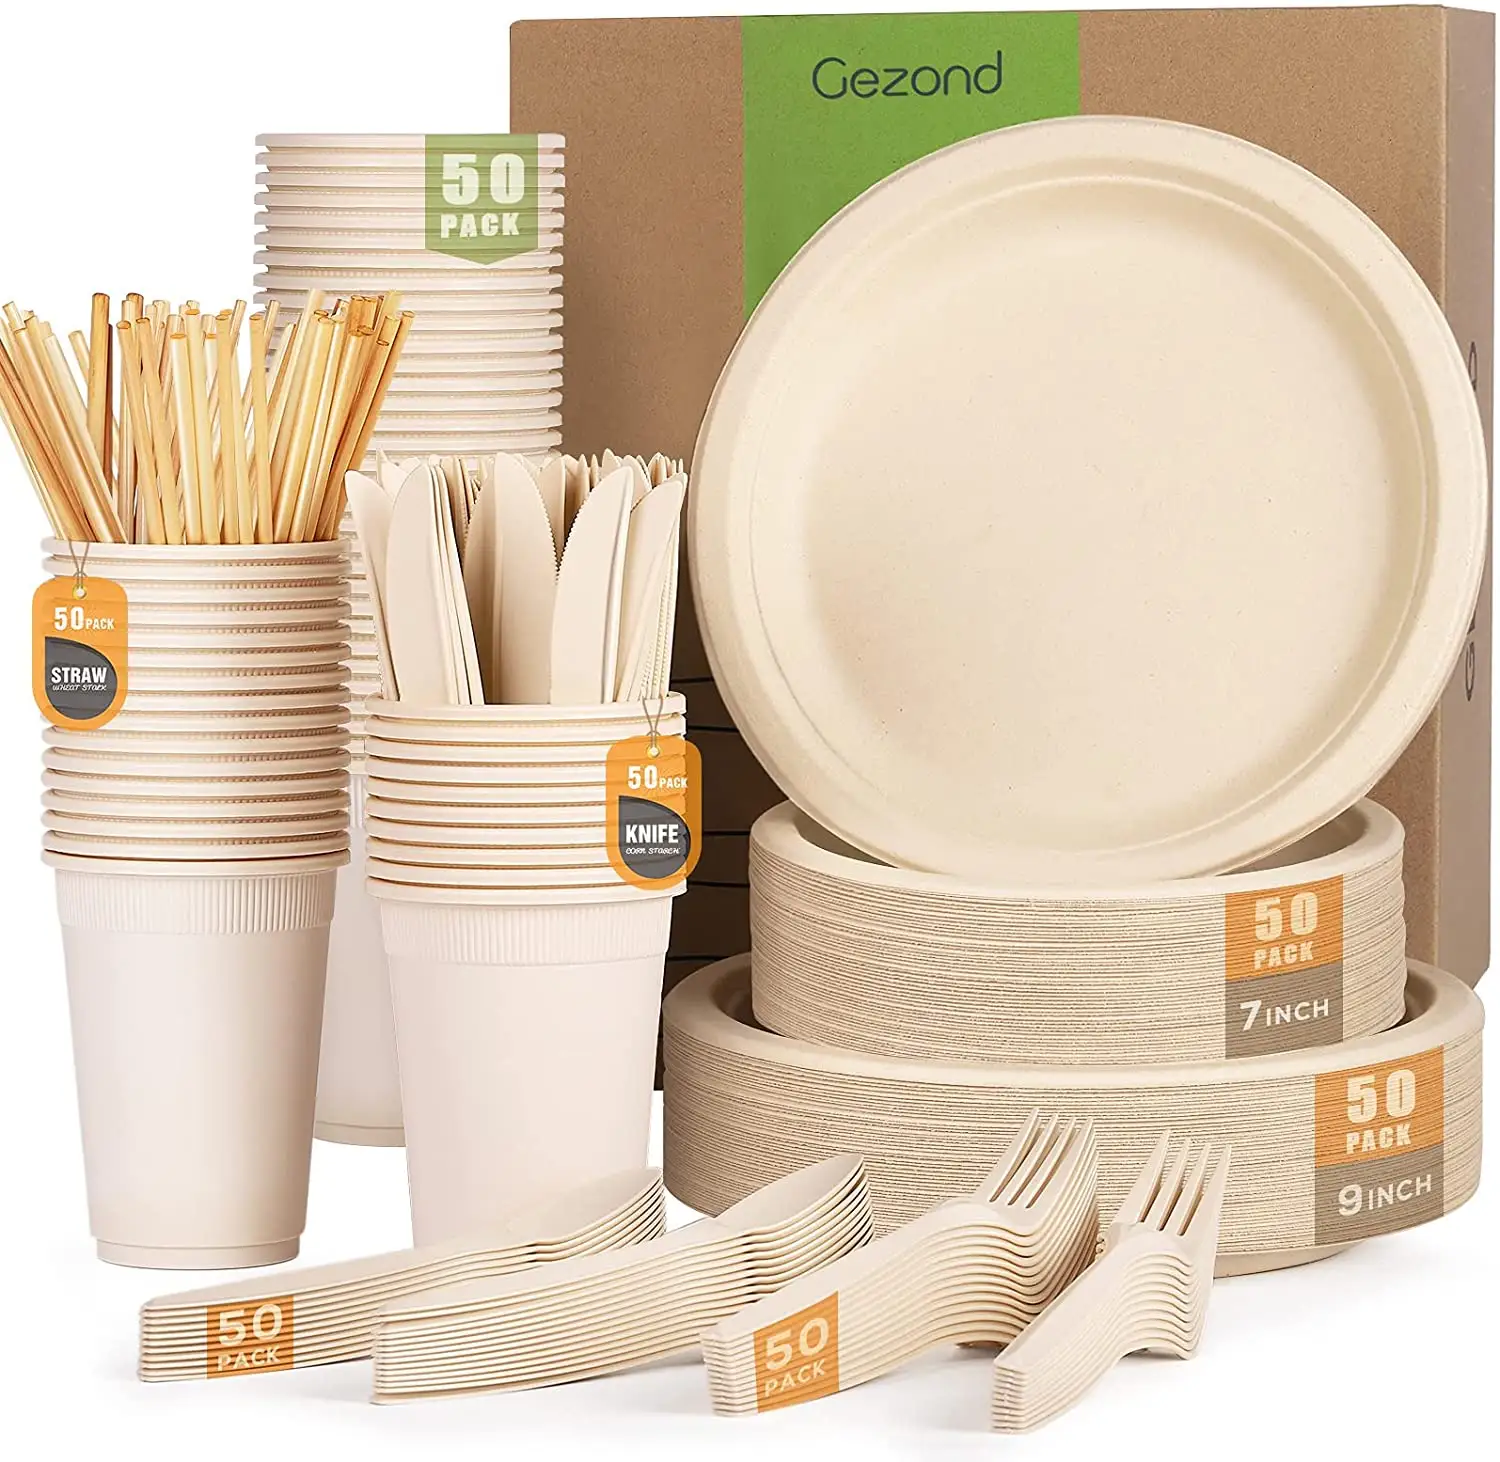 Compostable Paper Plates Set, Eco-friendly Heavy-duty Disposable Paper Plates Includes Biodegradable Plates, Forks, Knives